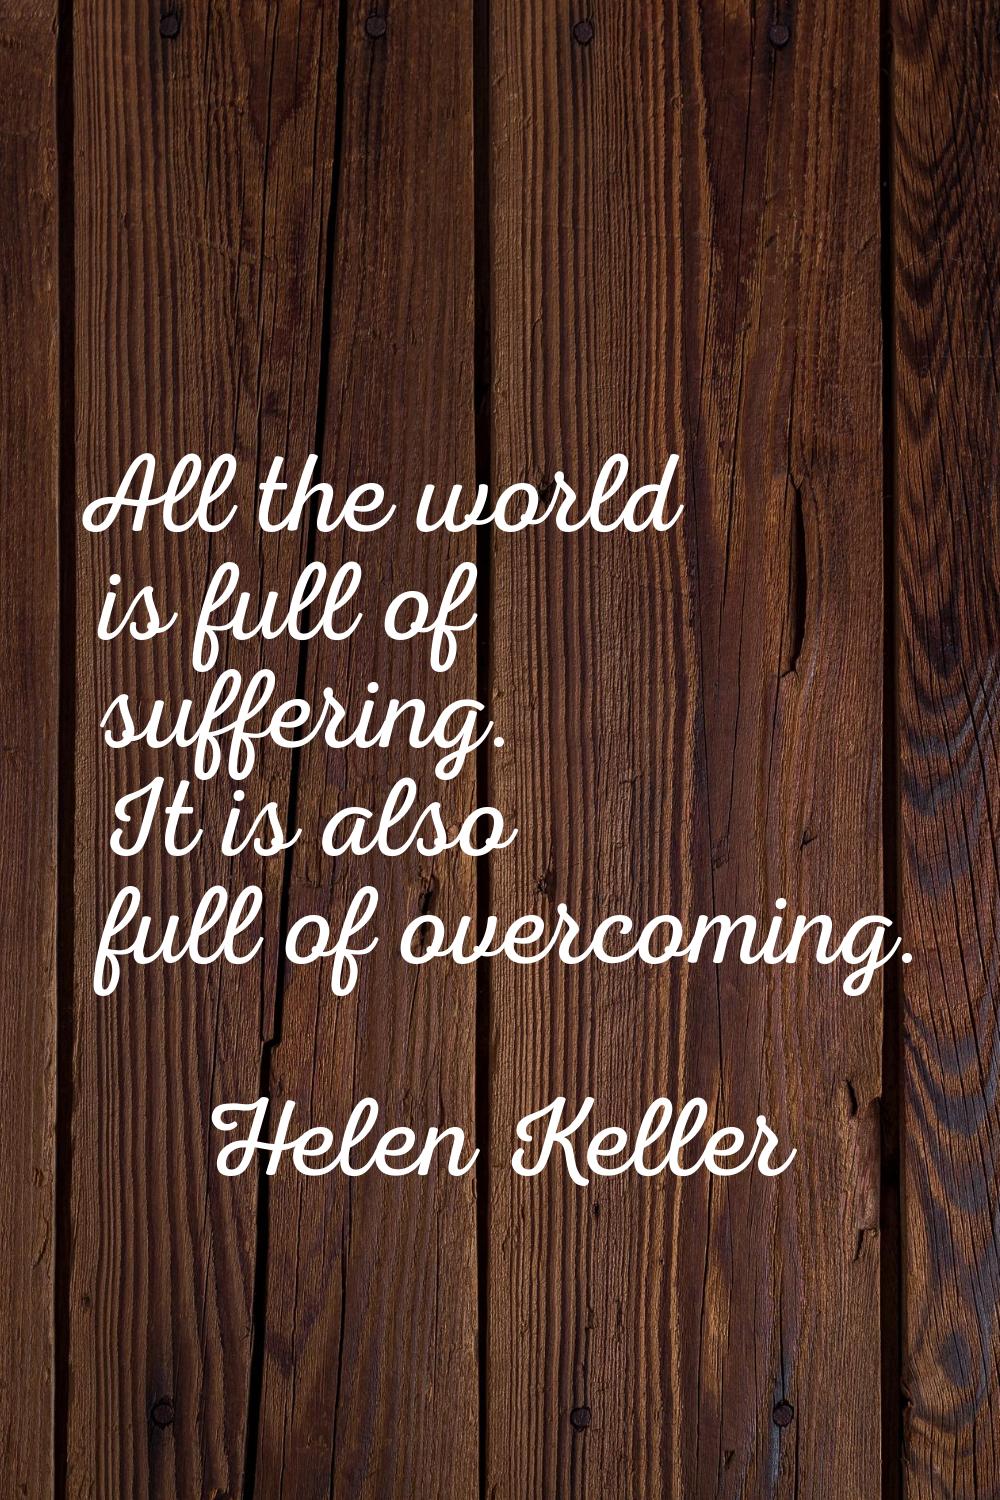 All the world is full of suffering. It is also full of overcoming.